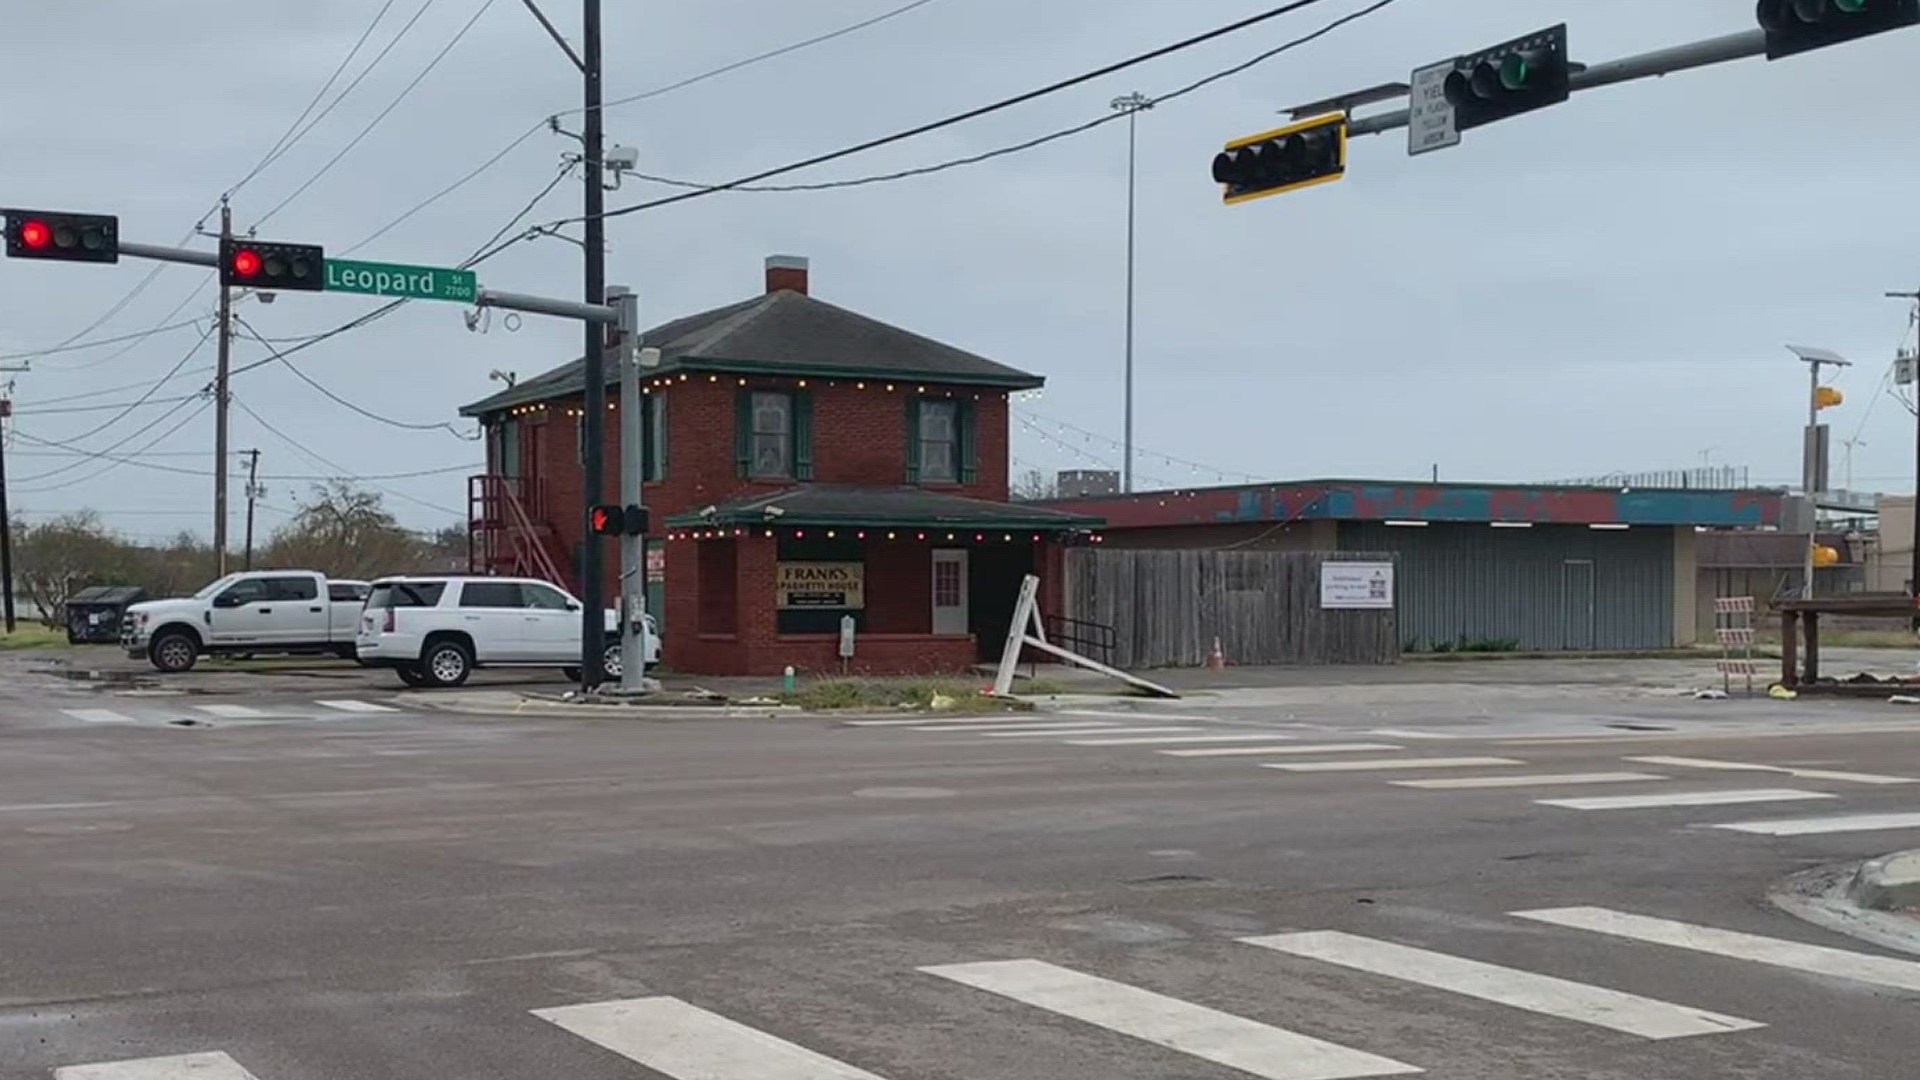 One business owner said she even considered closing her restaurant.